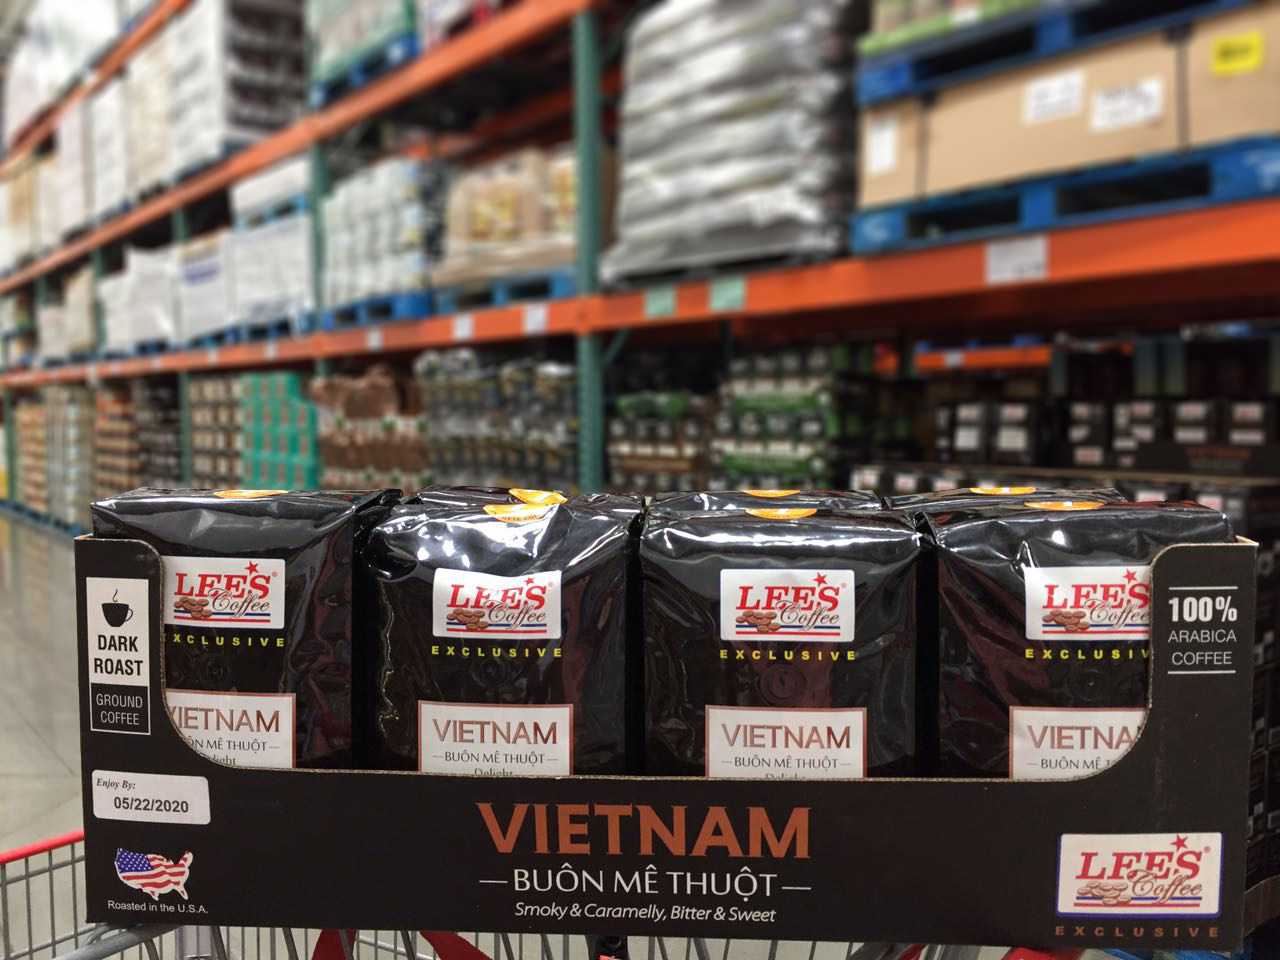 Lee's Sandwiches expands coffee products at select Costco stores